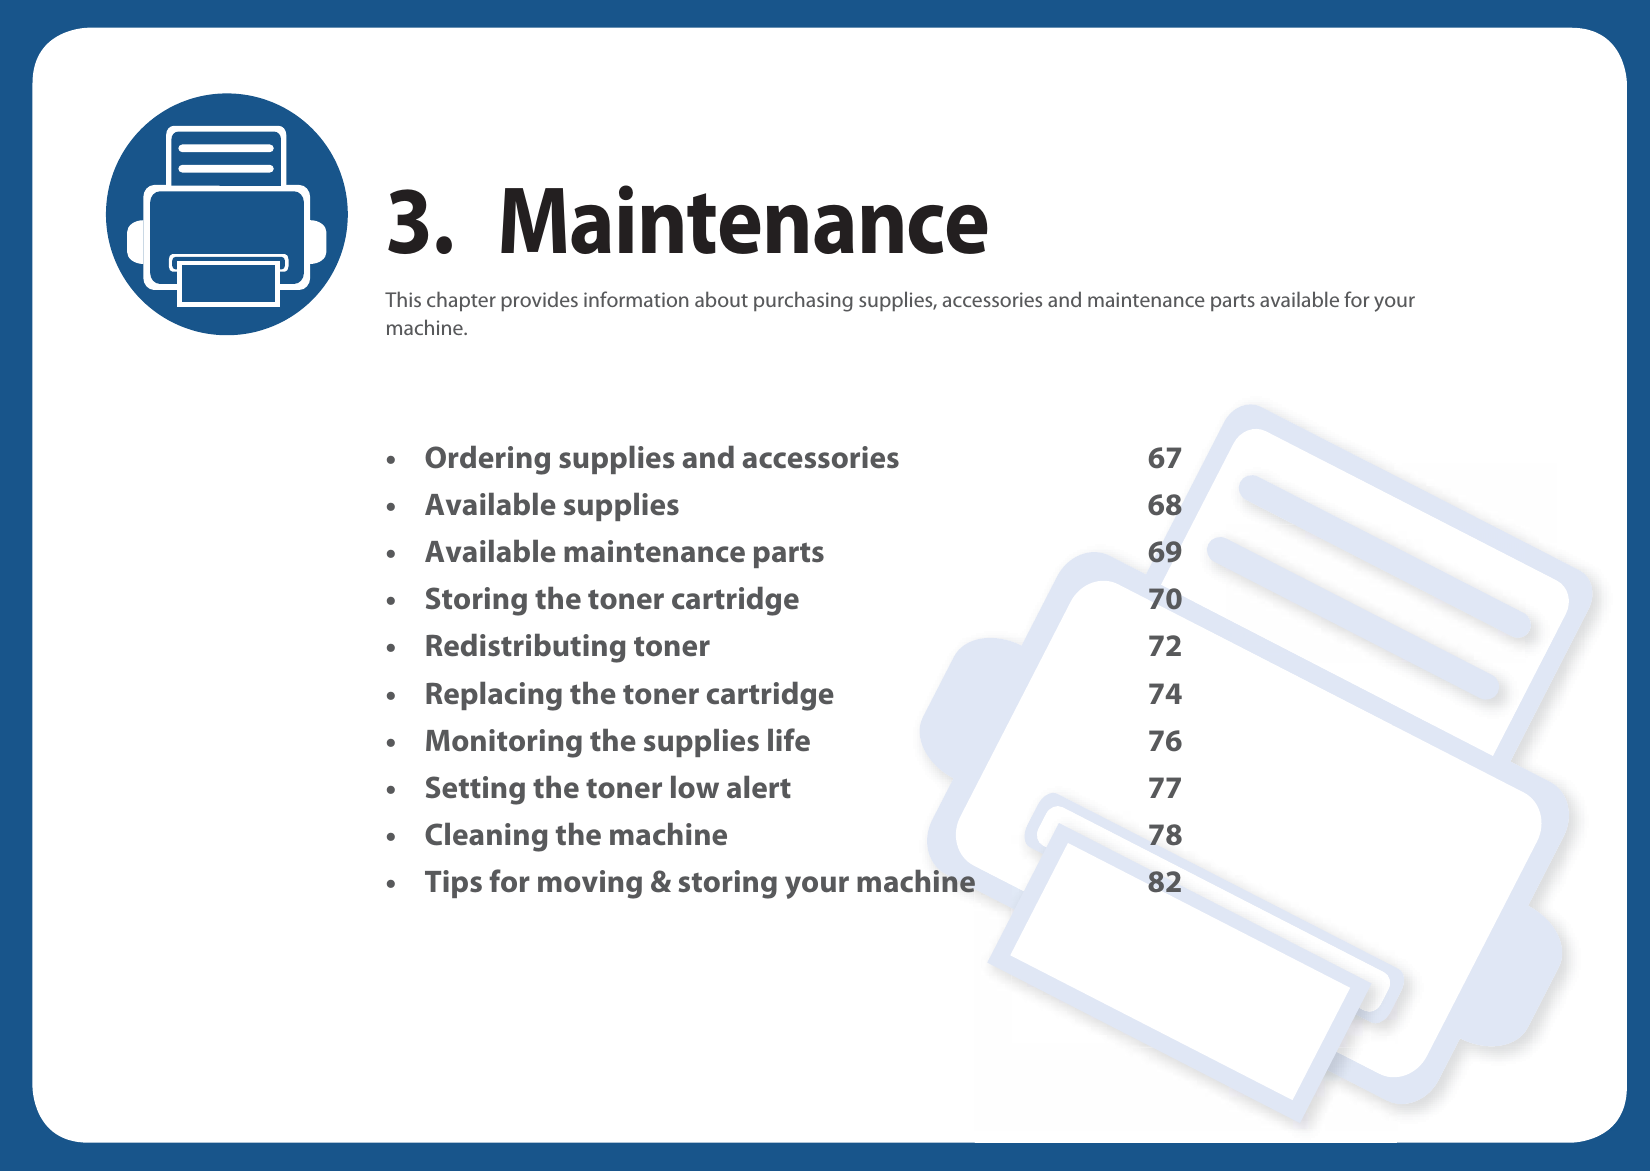 3. MaintenanceThis chapter provides information about purchasing supplies, accessories and maintenance parts available for your machine.• Ordering supplies and accessories 67• Available supplies 68• Available maintenance parts 69• Storing the toner cartridge 70• Redistributing toner 72• Replacing the toner cartridge 74• Monitoring the supplies life 76• Setting the toner low alert 77• Cleaning the machine 78• Tips for moving &amp; storing your machine 82